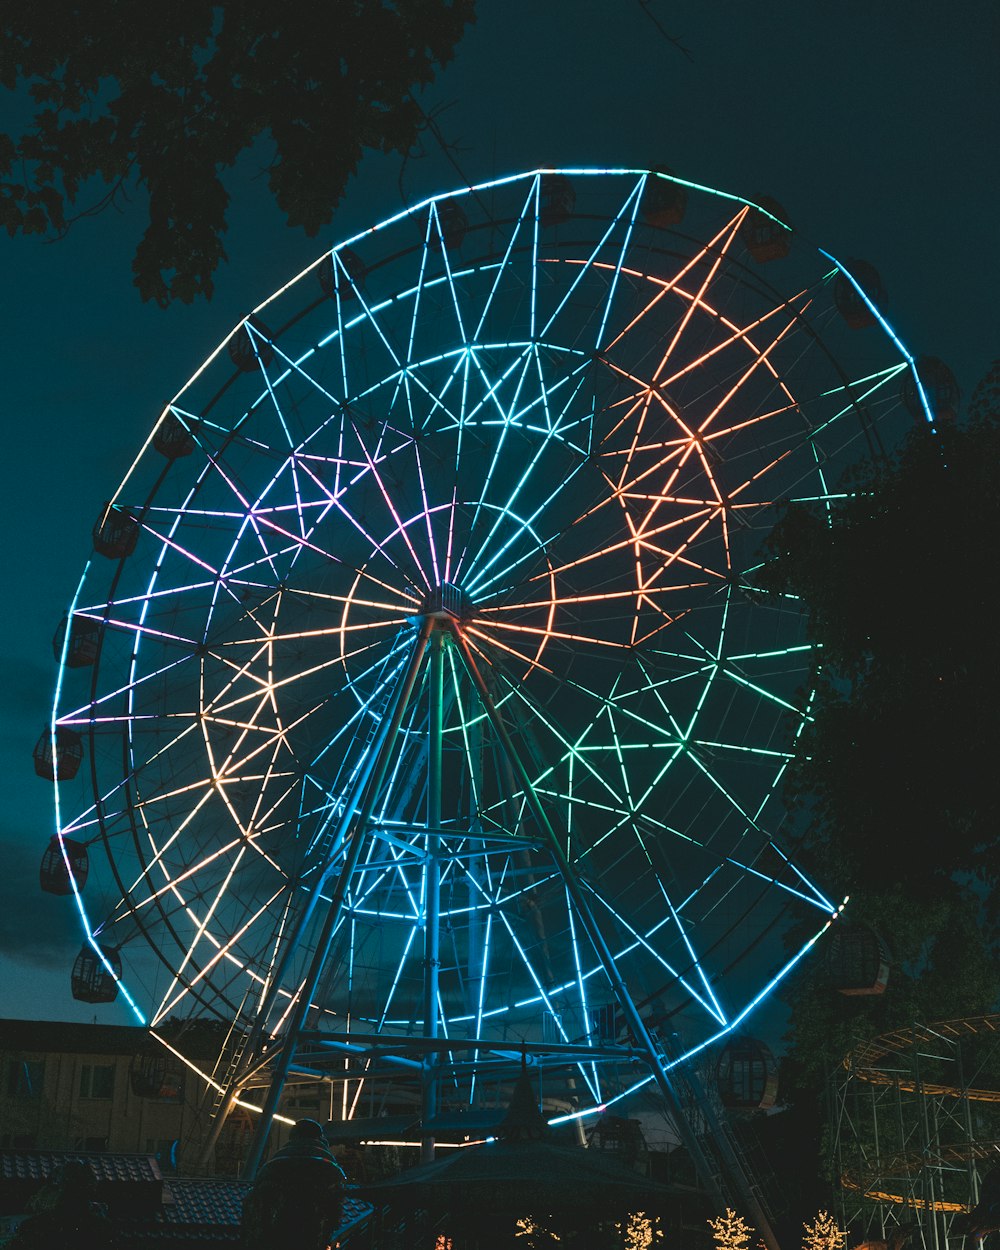 blue and white ferris wheel during night time